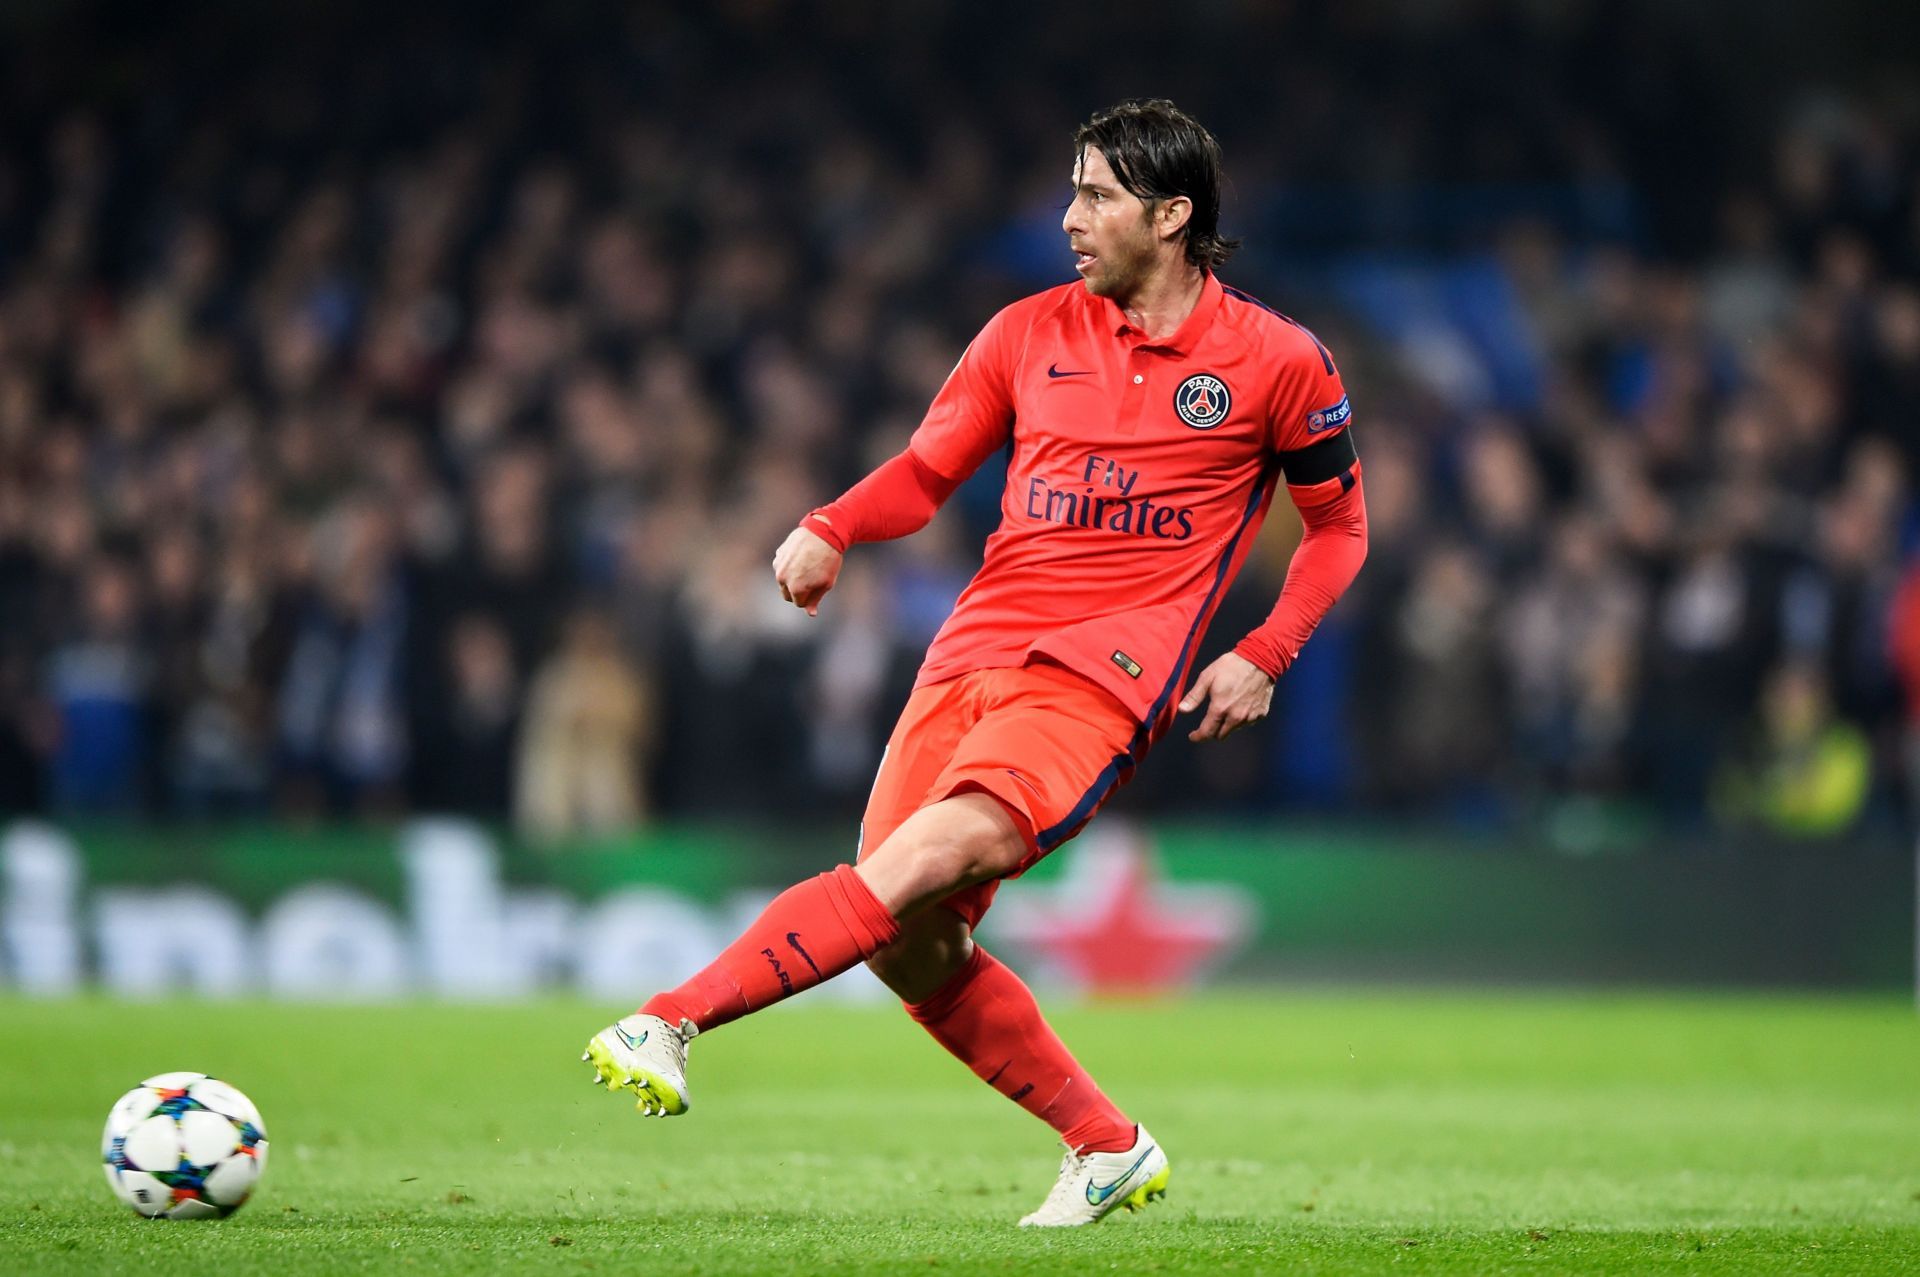 Maxwell played the majority of his career games in the PSG kit